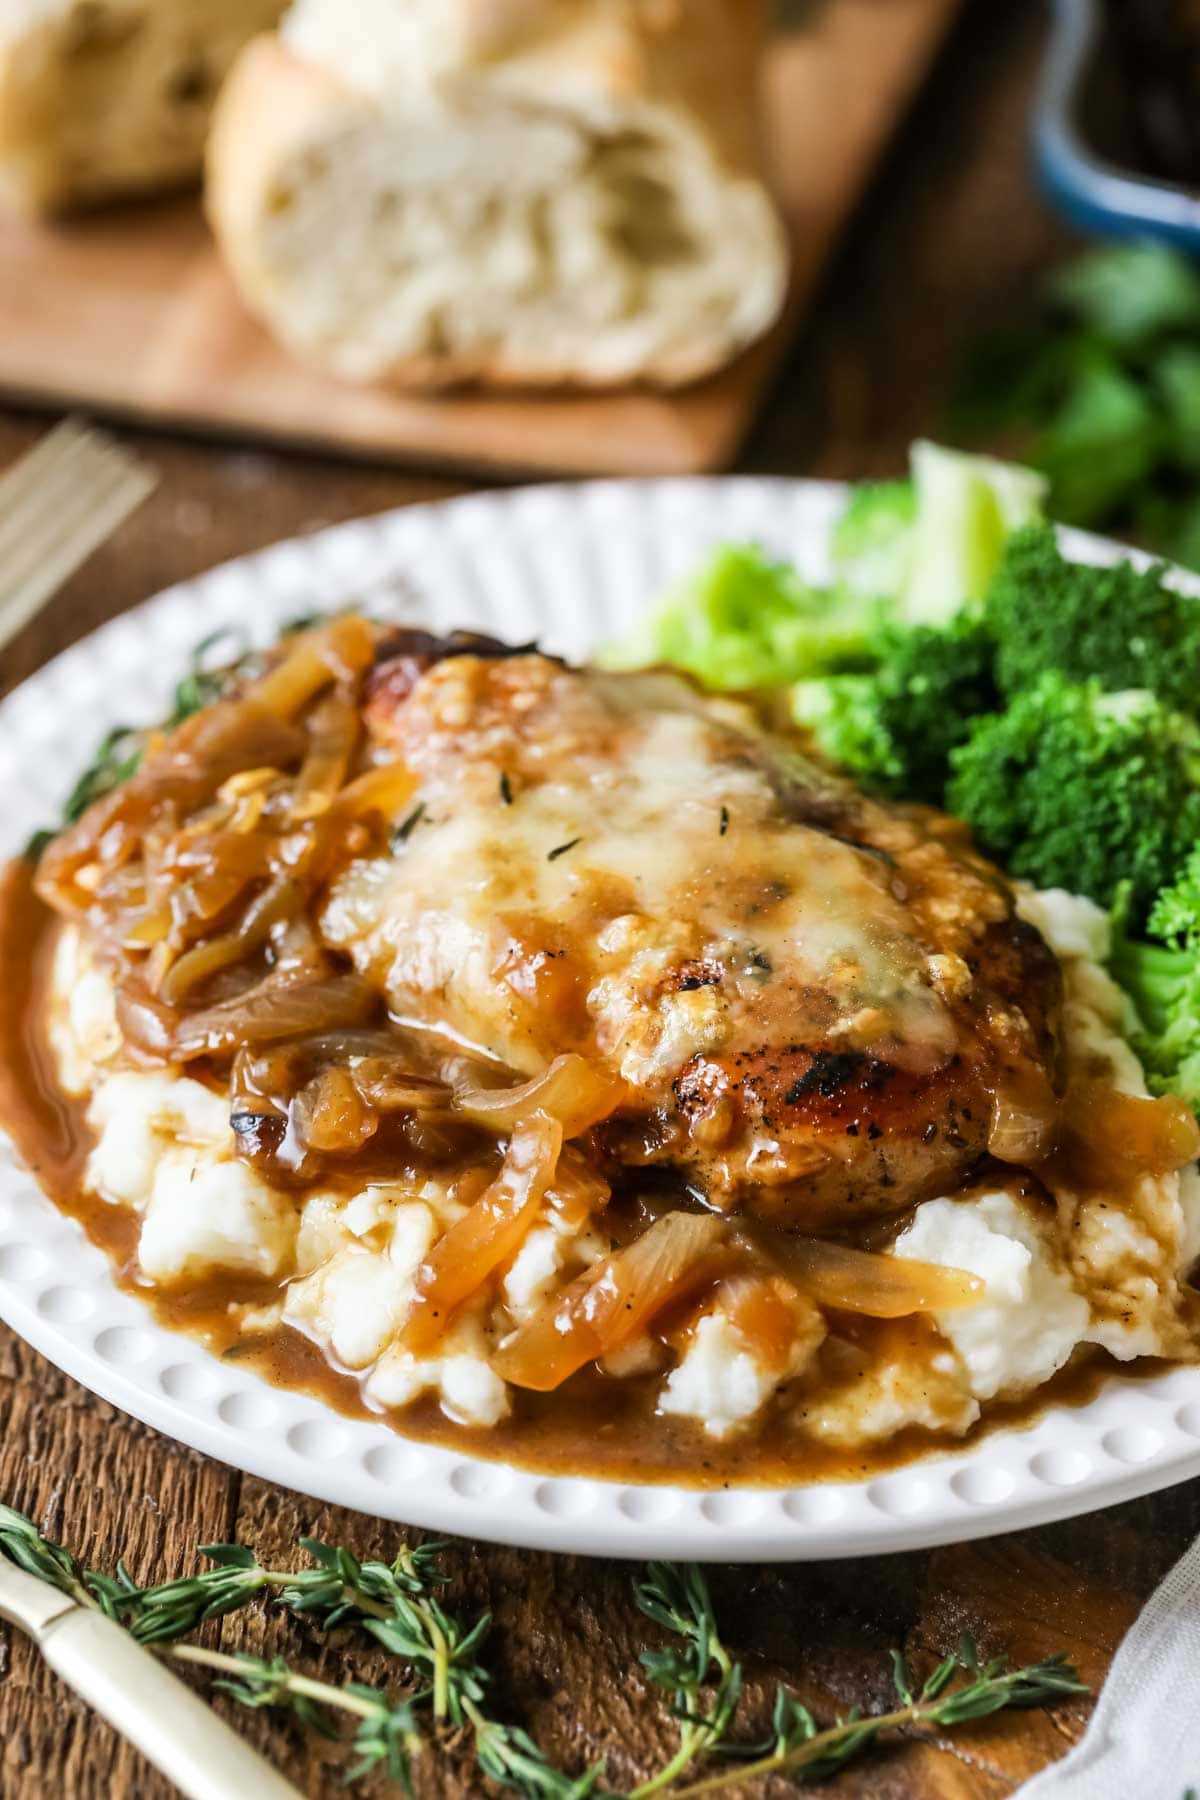 Plate with french onion chicken served over mashed potatoes with steamed broccoli on the side.